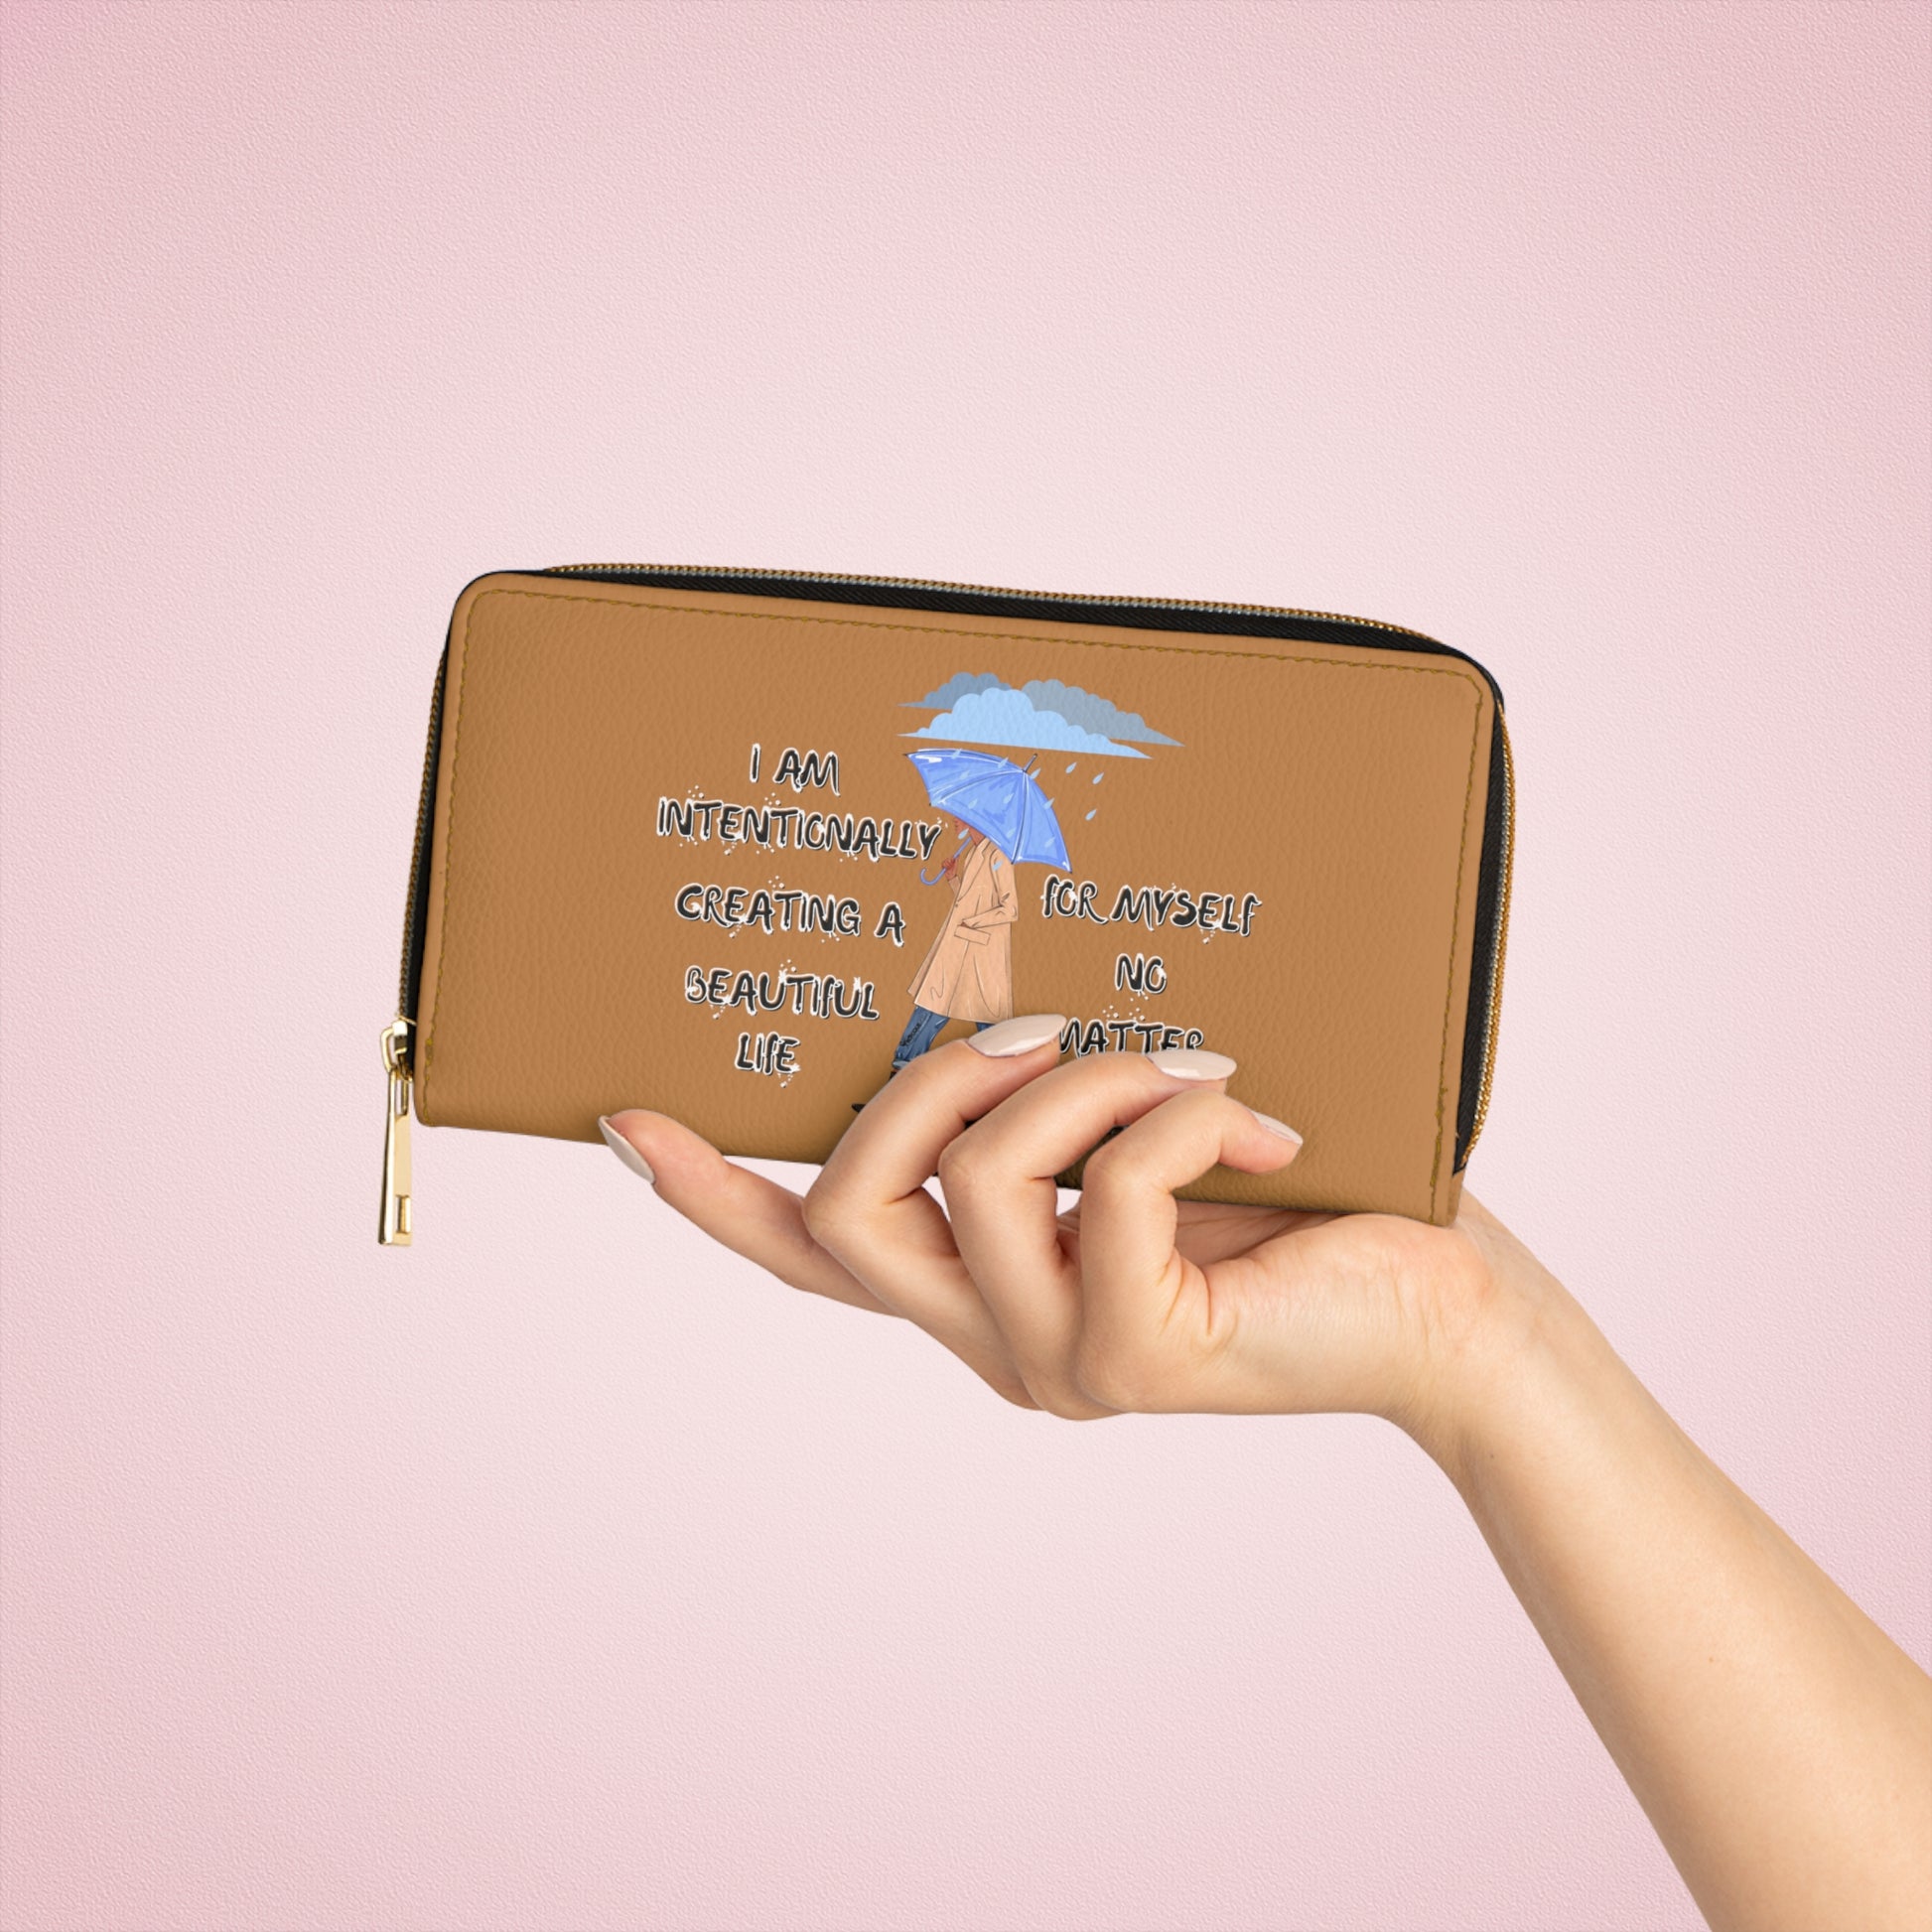 "I AM Intentionally Creating A Beautiful Life"- Positive Afrocentric Affirmation Vegan Leather Wallet Bag- Empower Your Style and Self-Love- Brown Wallet